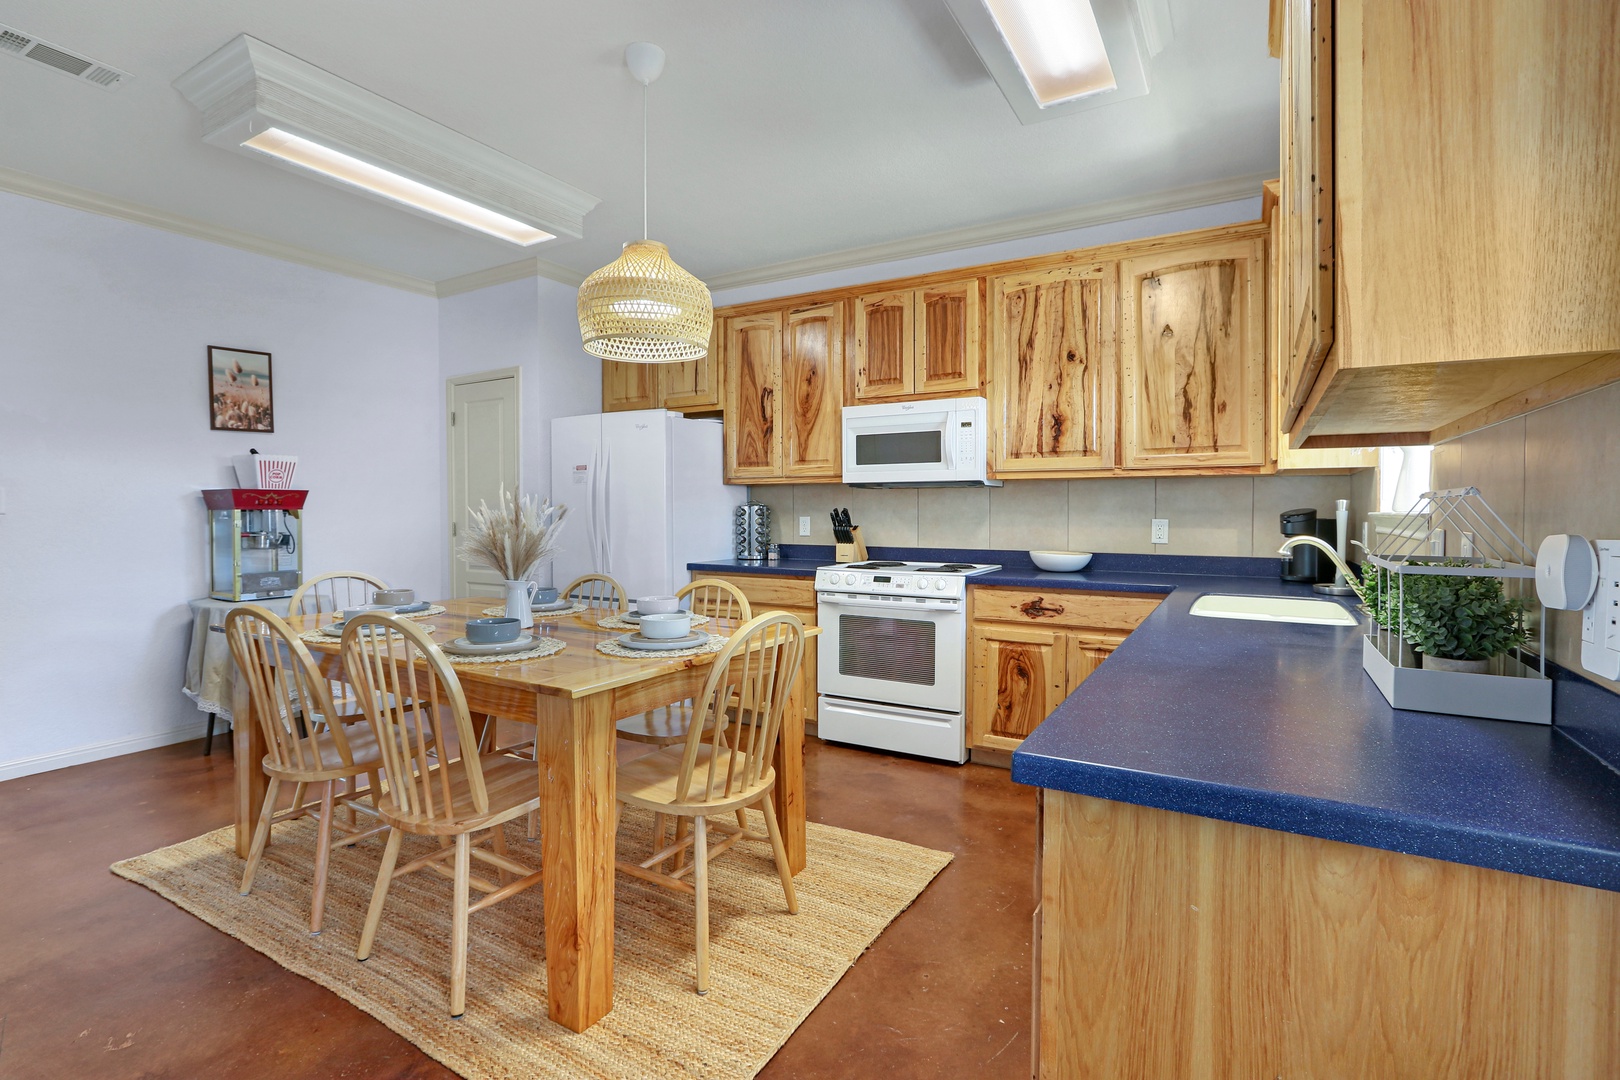 The spacious eat-in kitchen is well equipped for your visit to New Braunfels